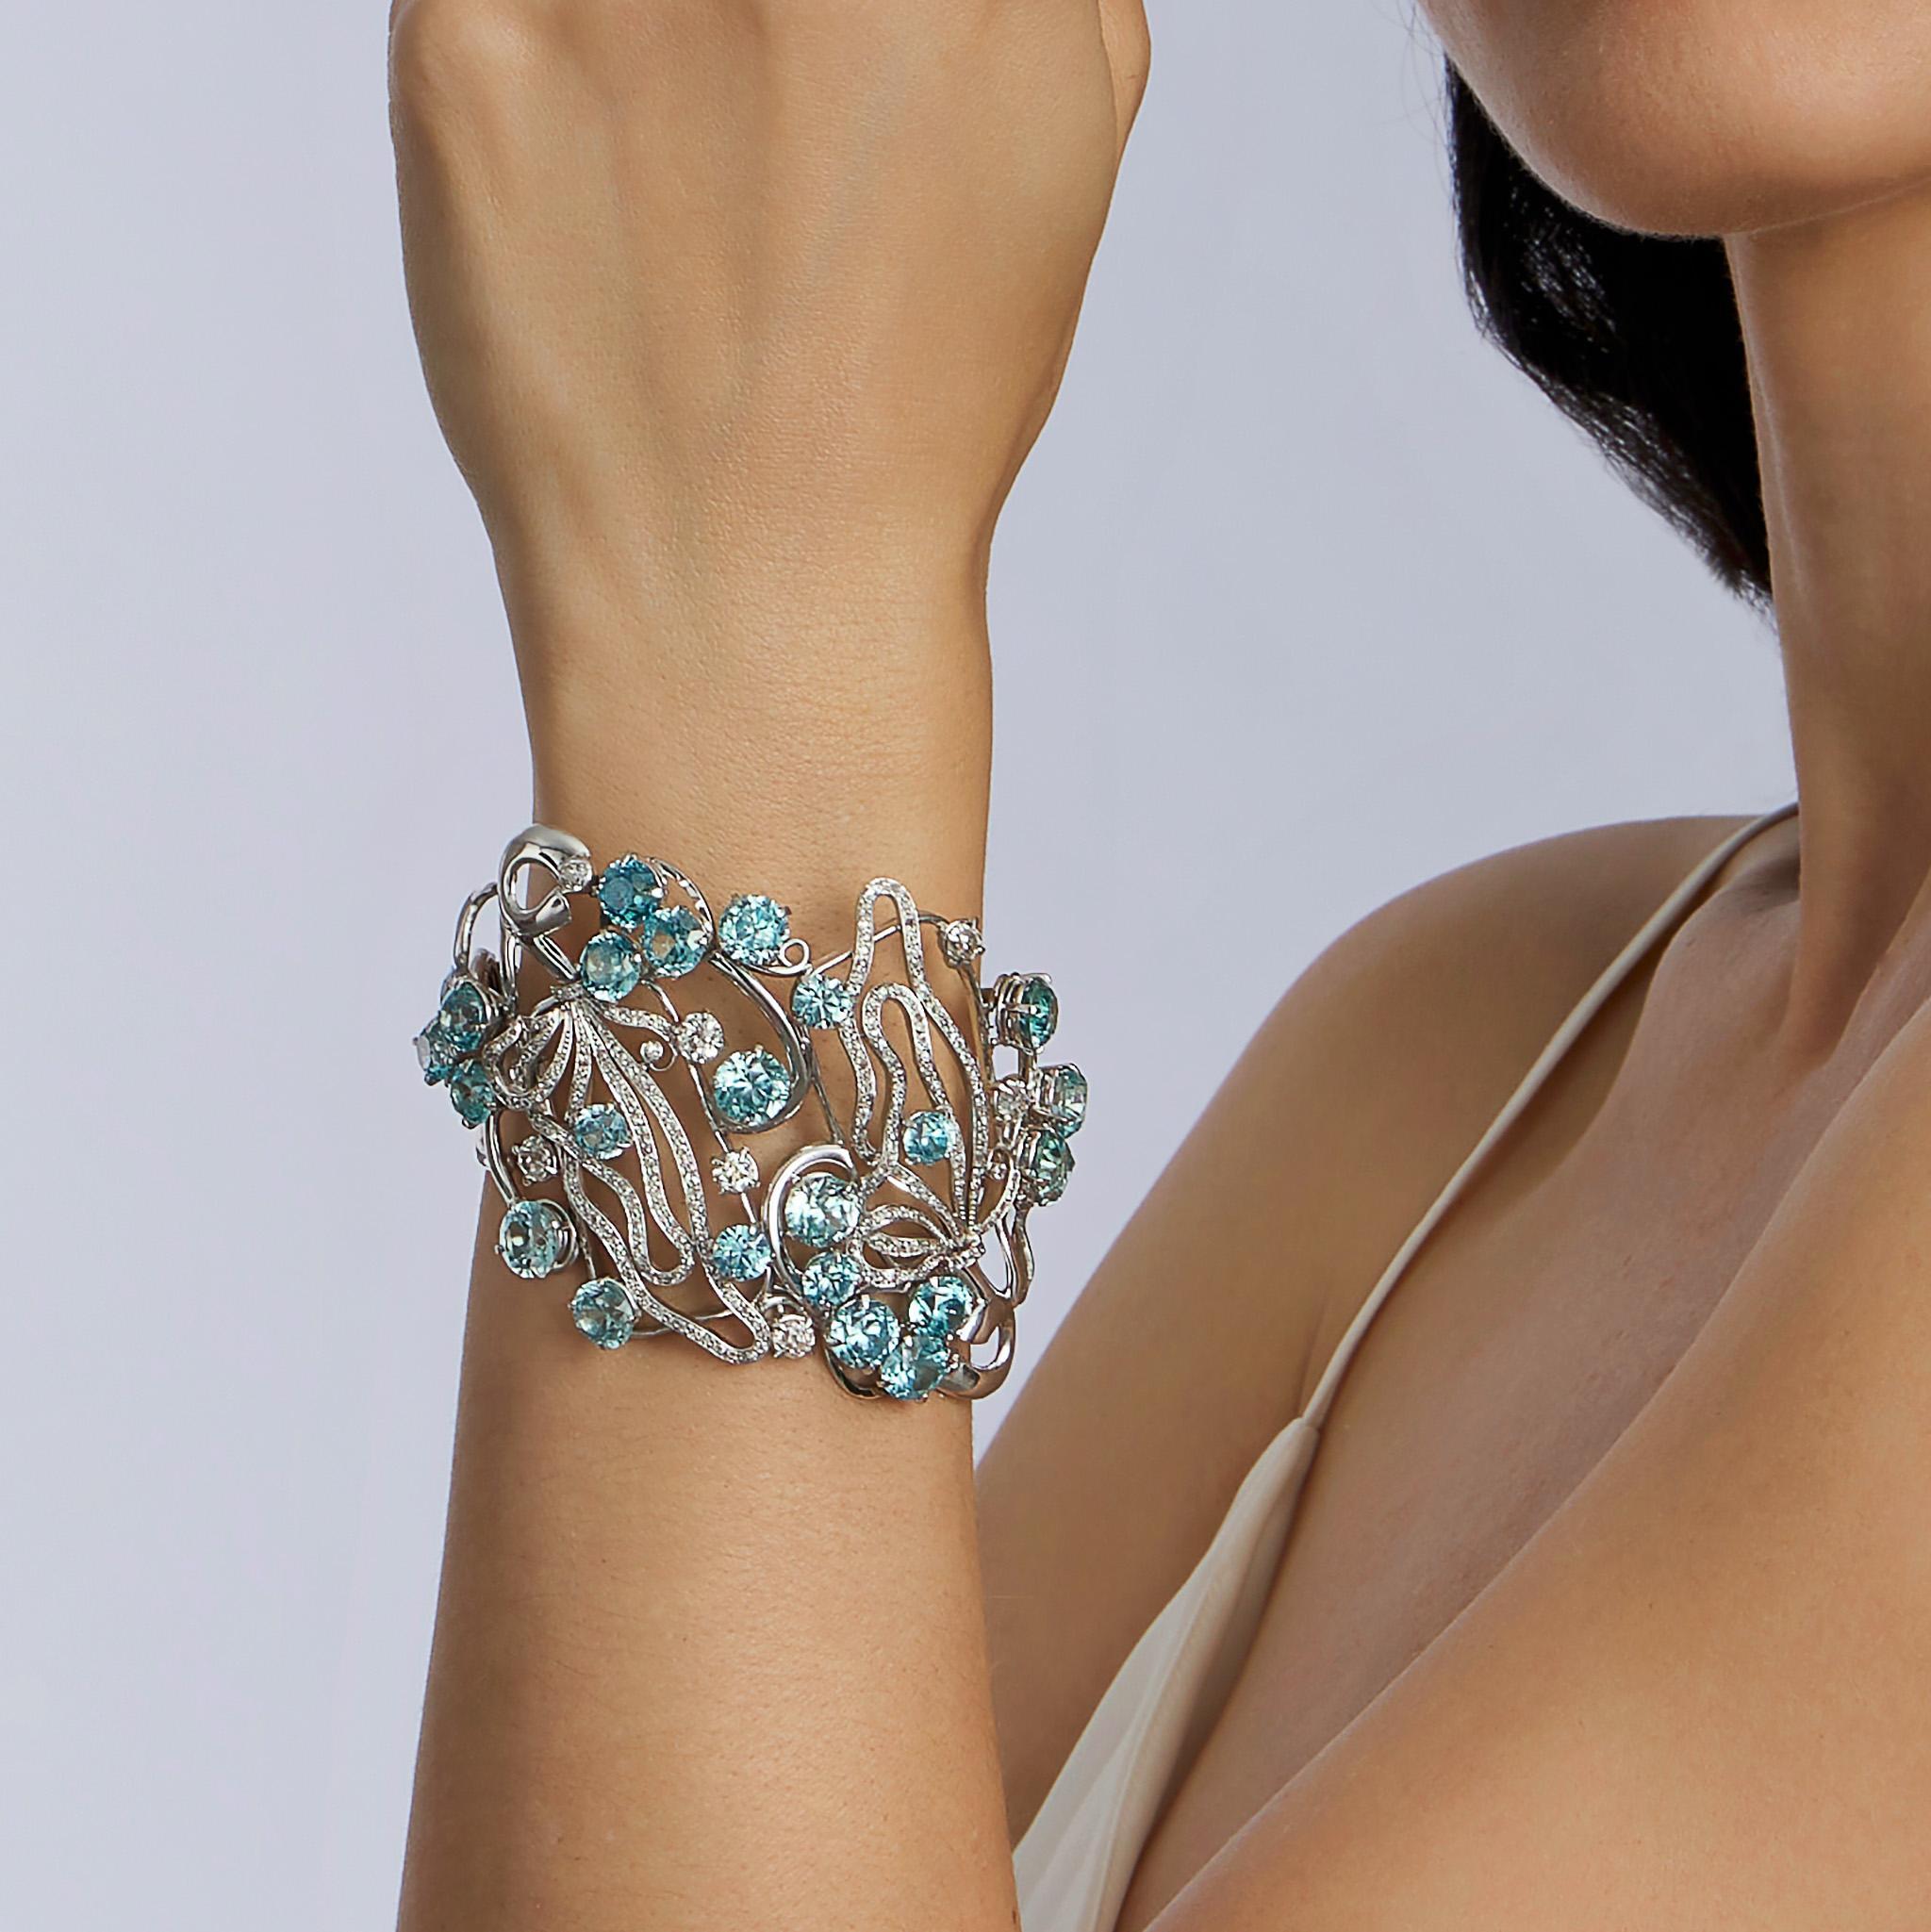 Created in the late 20th century, this blue zircon and diamond bracelet by Seaman Schepps is set in 18K white gold. The broad bracelet of freeform, abstract design is set with circular-cut blue zircons among meandering lines of pavé-set diamonds. An